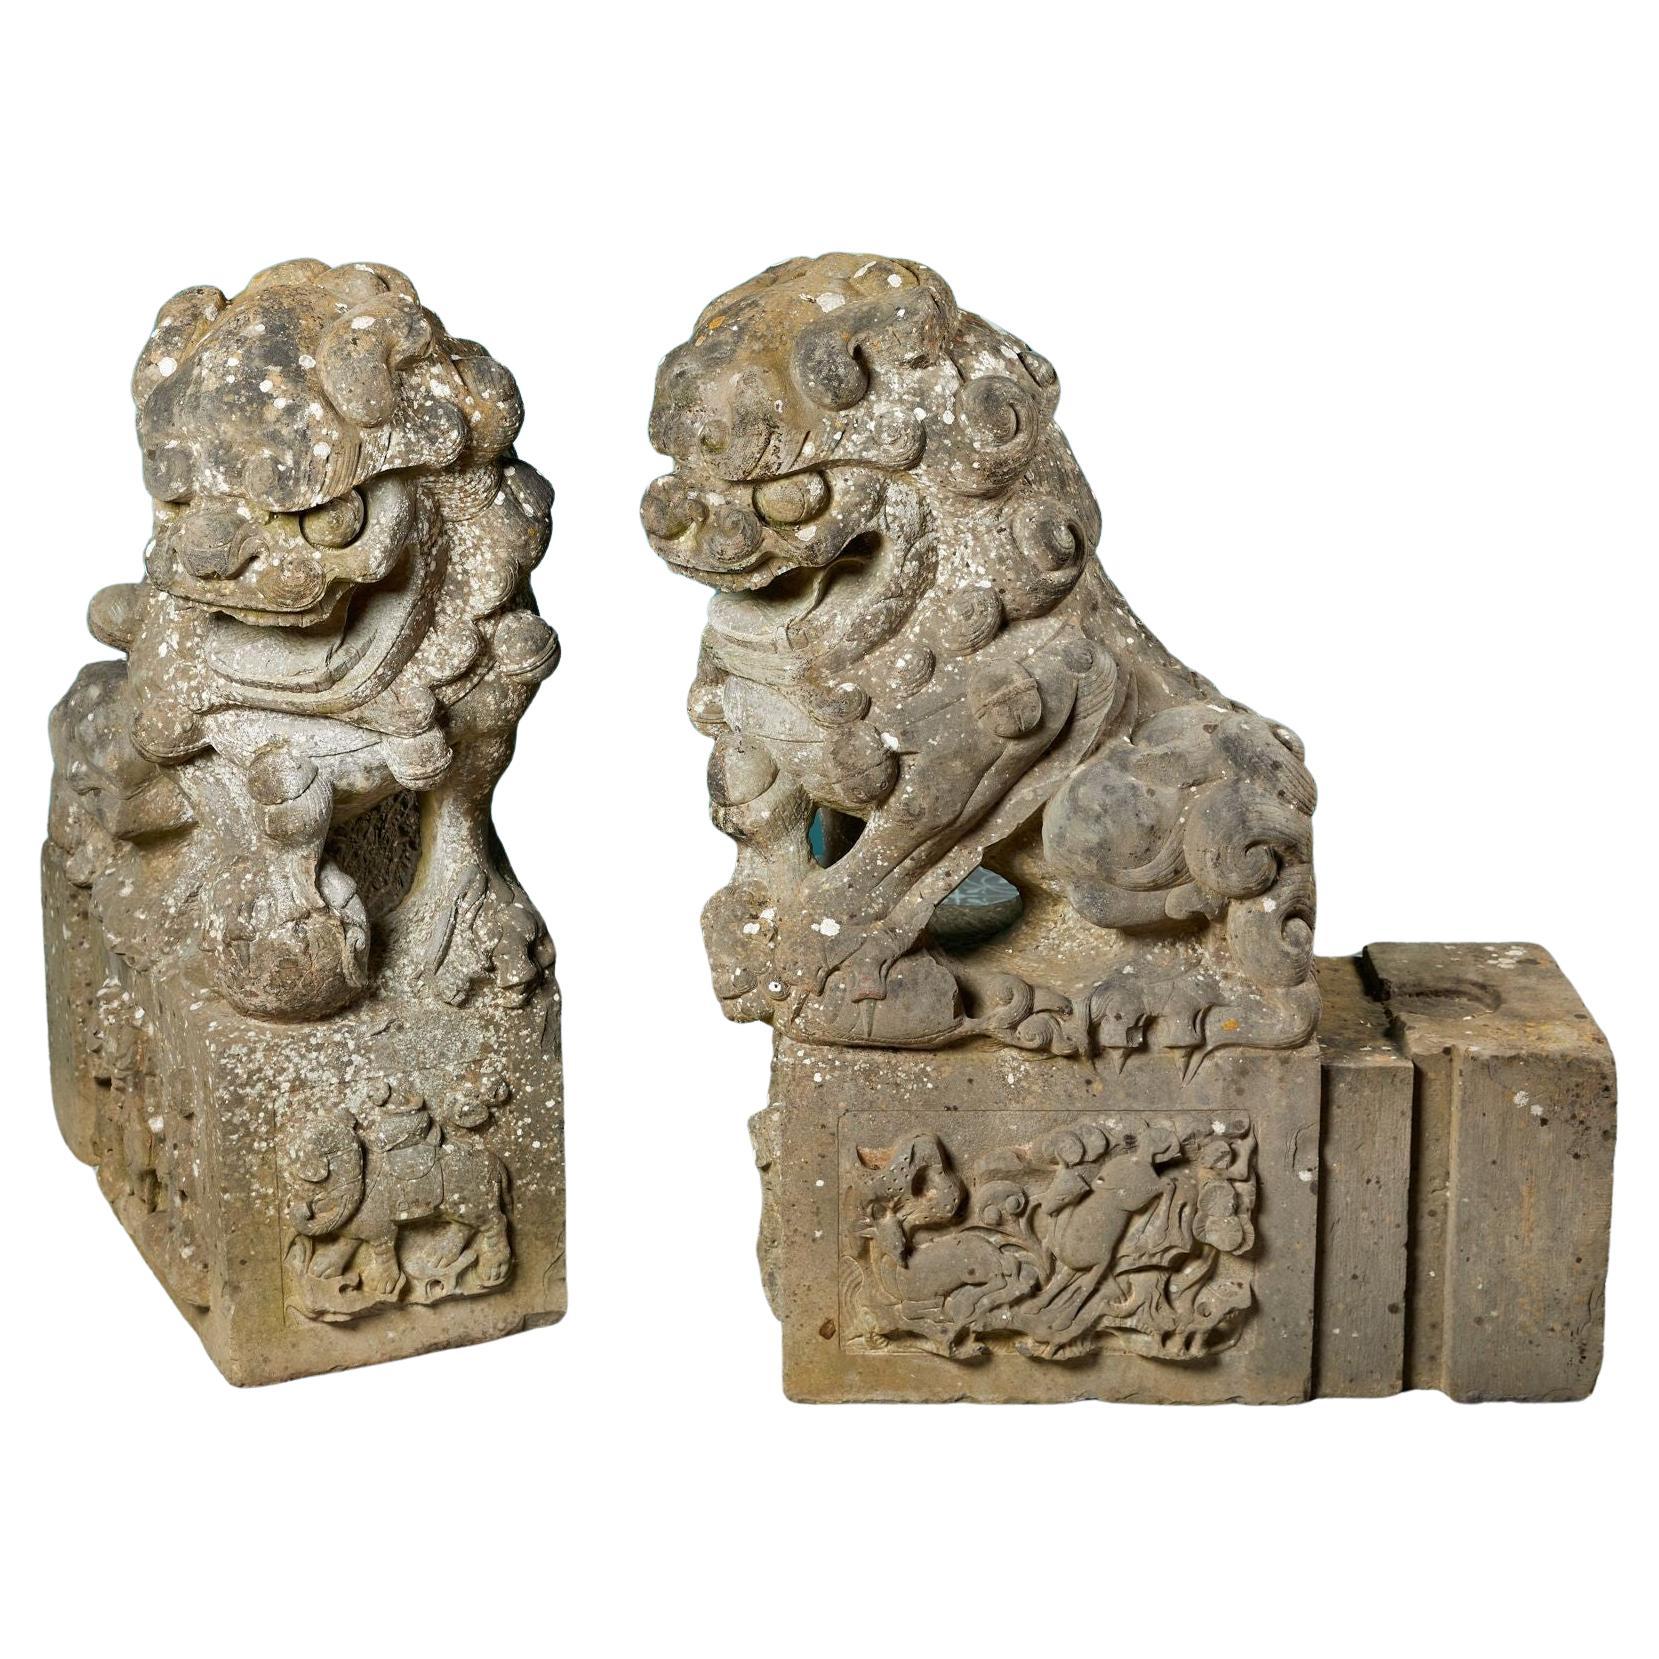 Pair of Carved Stone Chinese Guardian Lion Statues